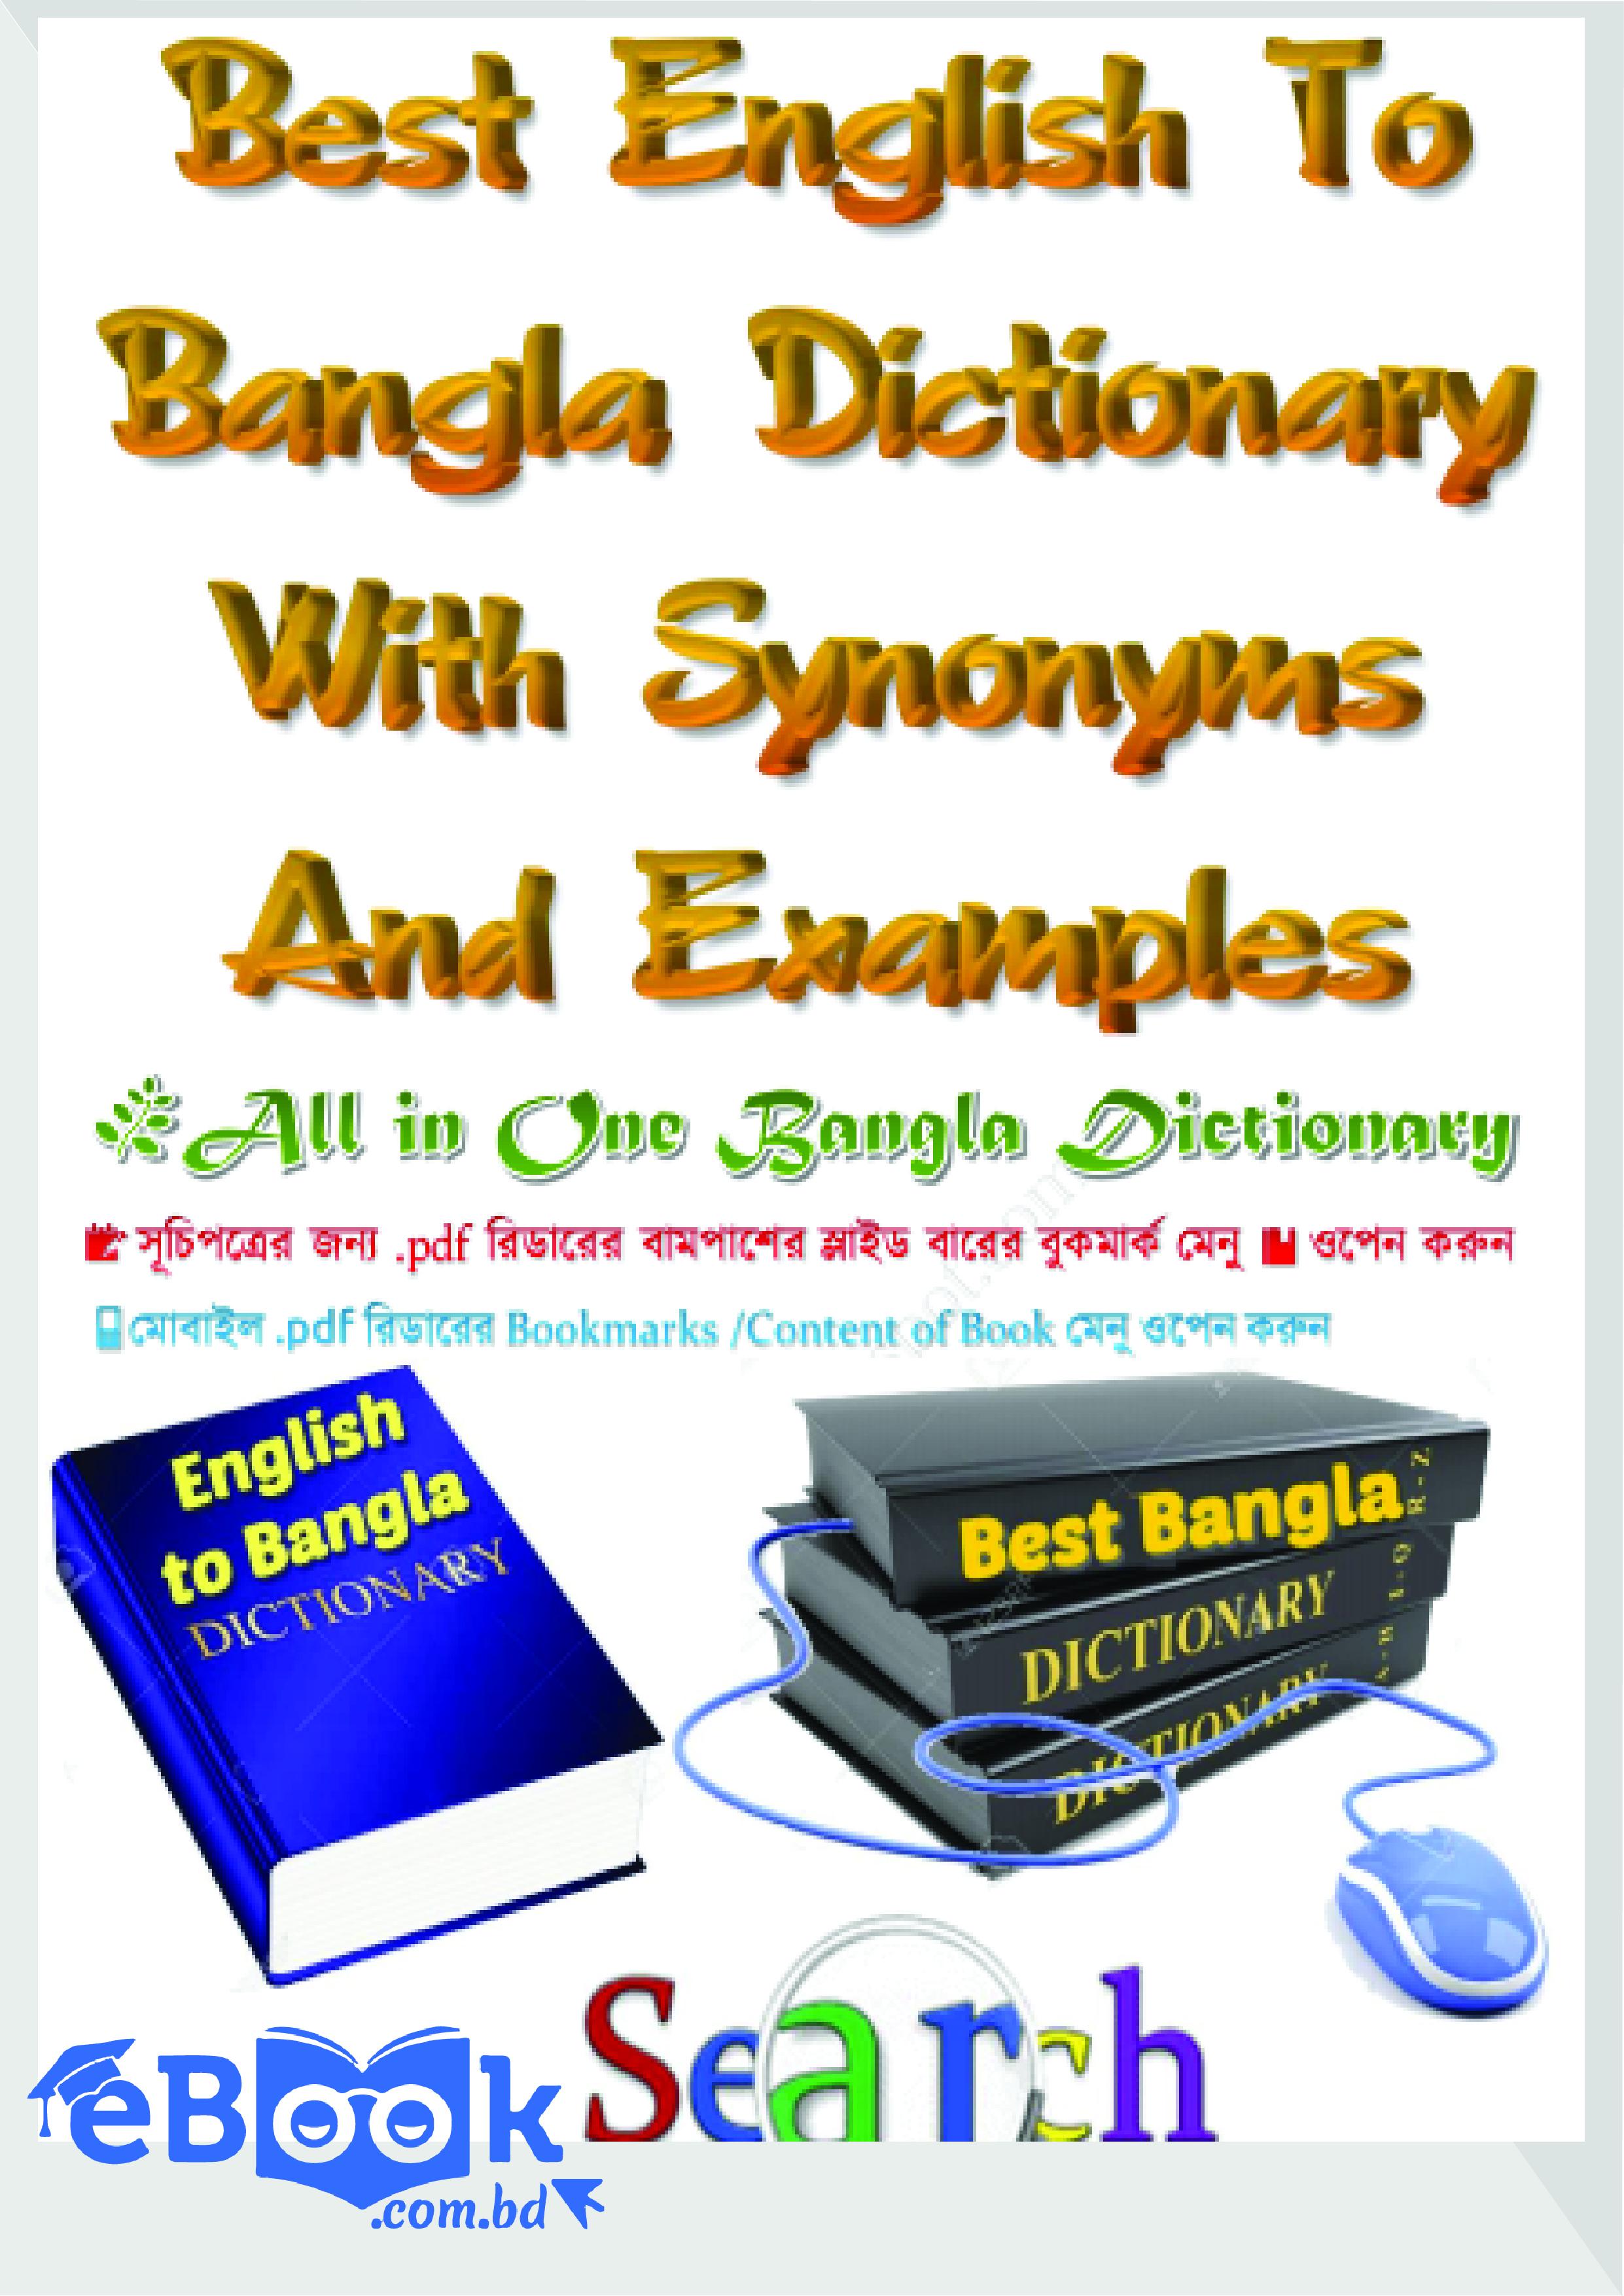 Thumbnail of Best English To Bangla Dictionary With Synonyms And Examples